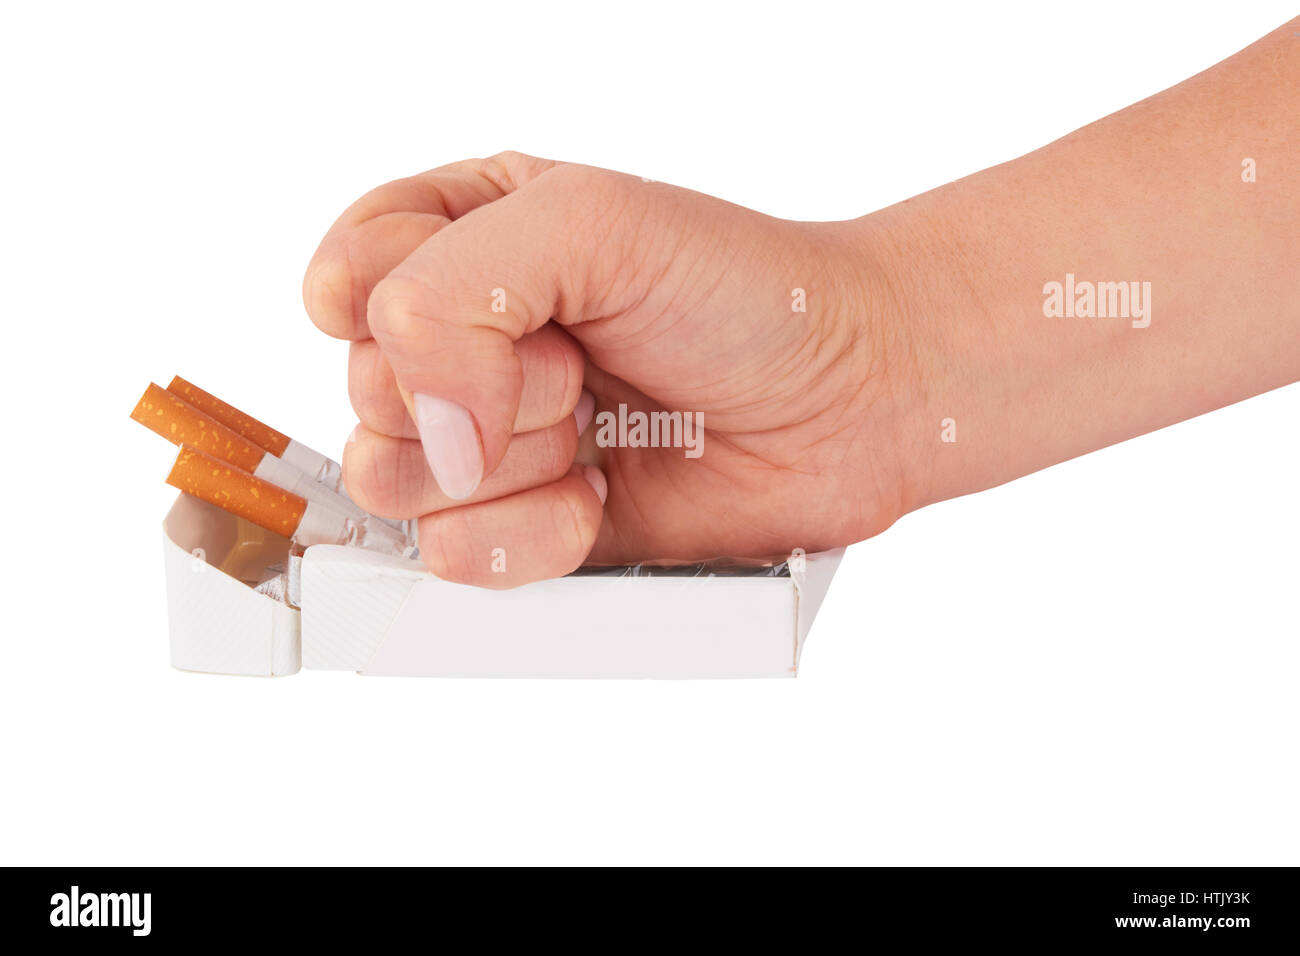 stop smoking fist with crushed pack of cigarettes Stock Photo